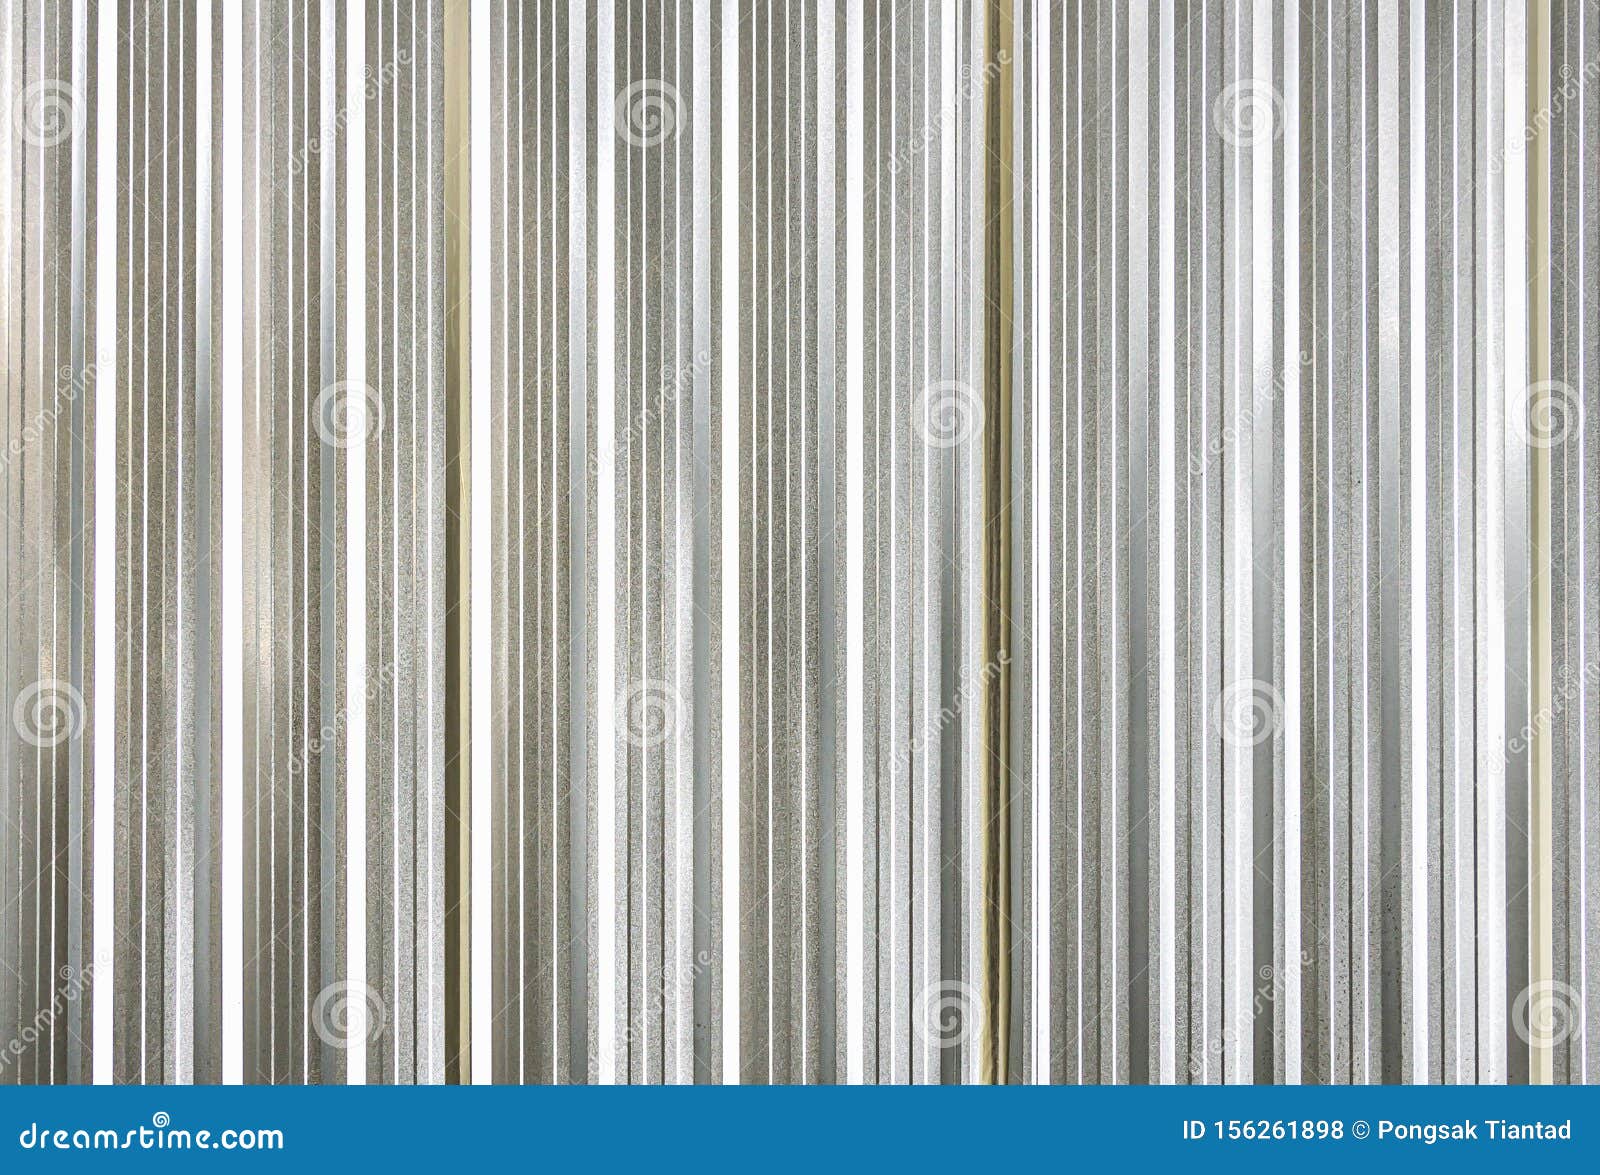 Wall Or Fence Made Of Galvanized Steel Sheet Has A Small Wavy Appearance, Is Durable And Strong